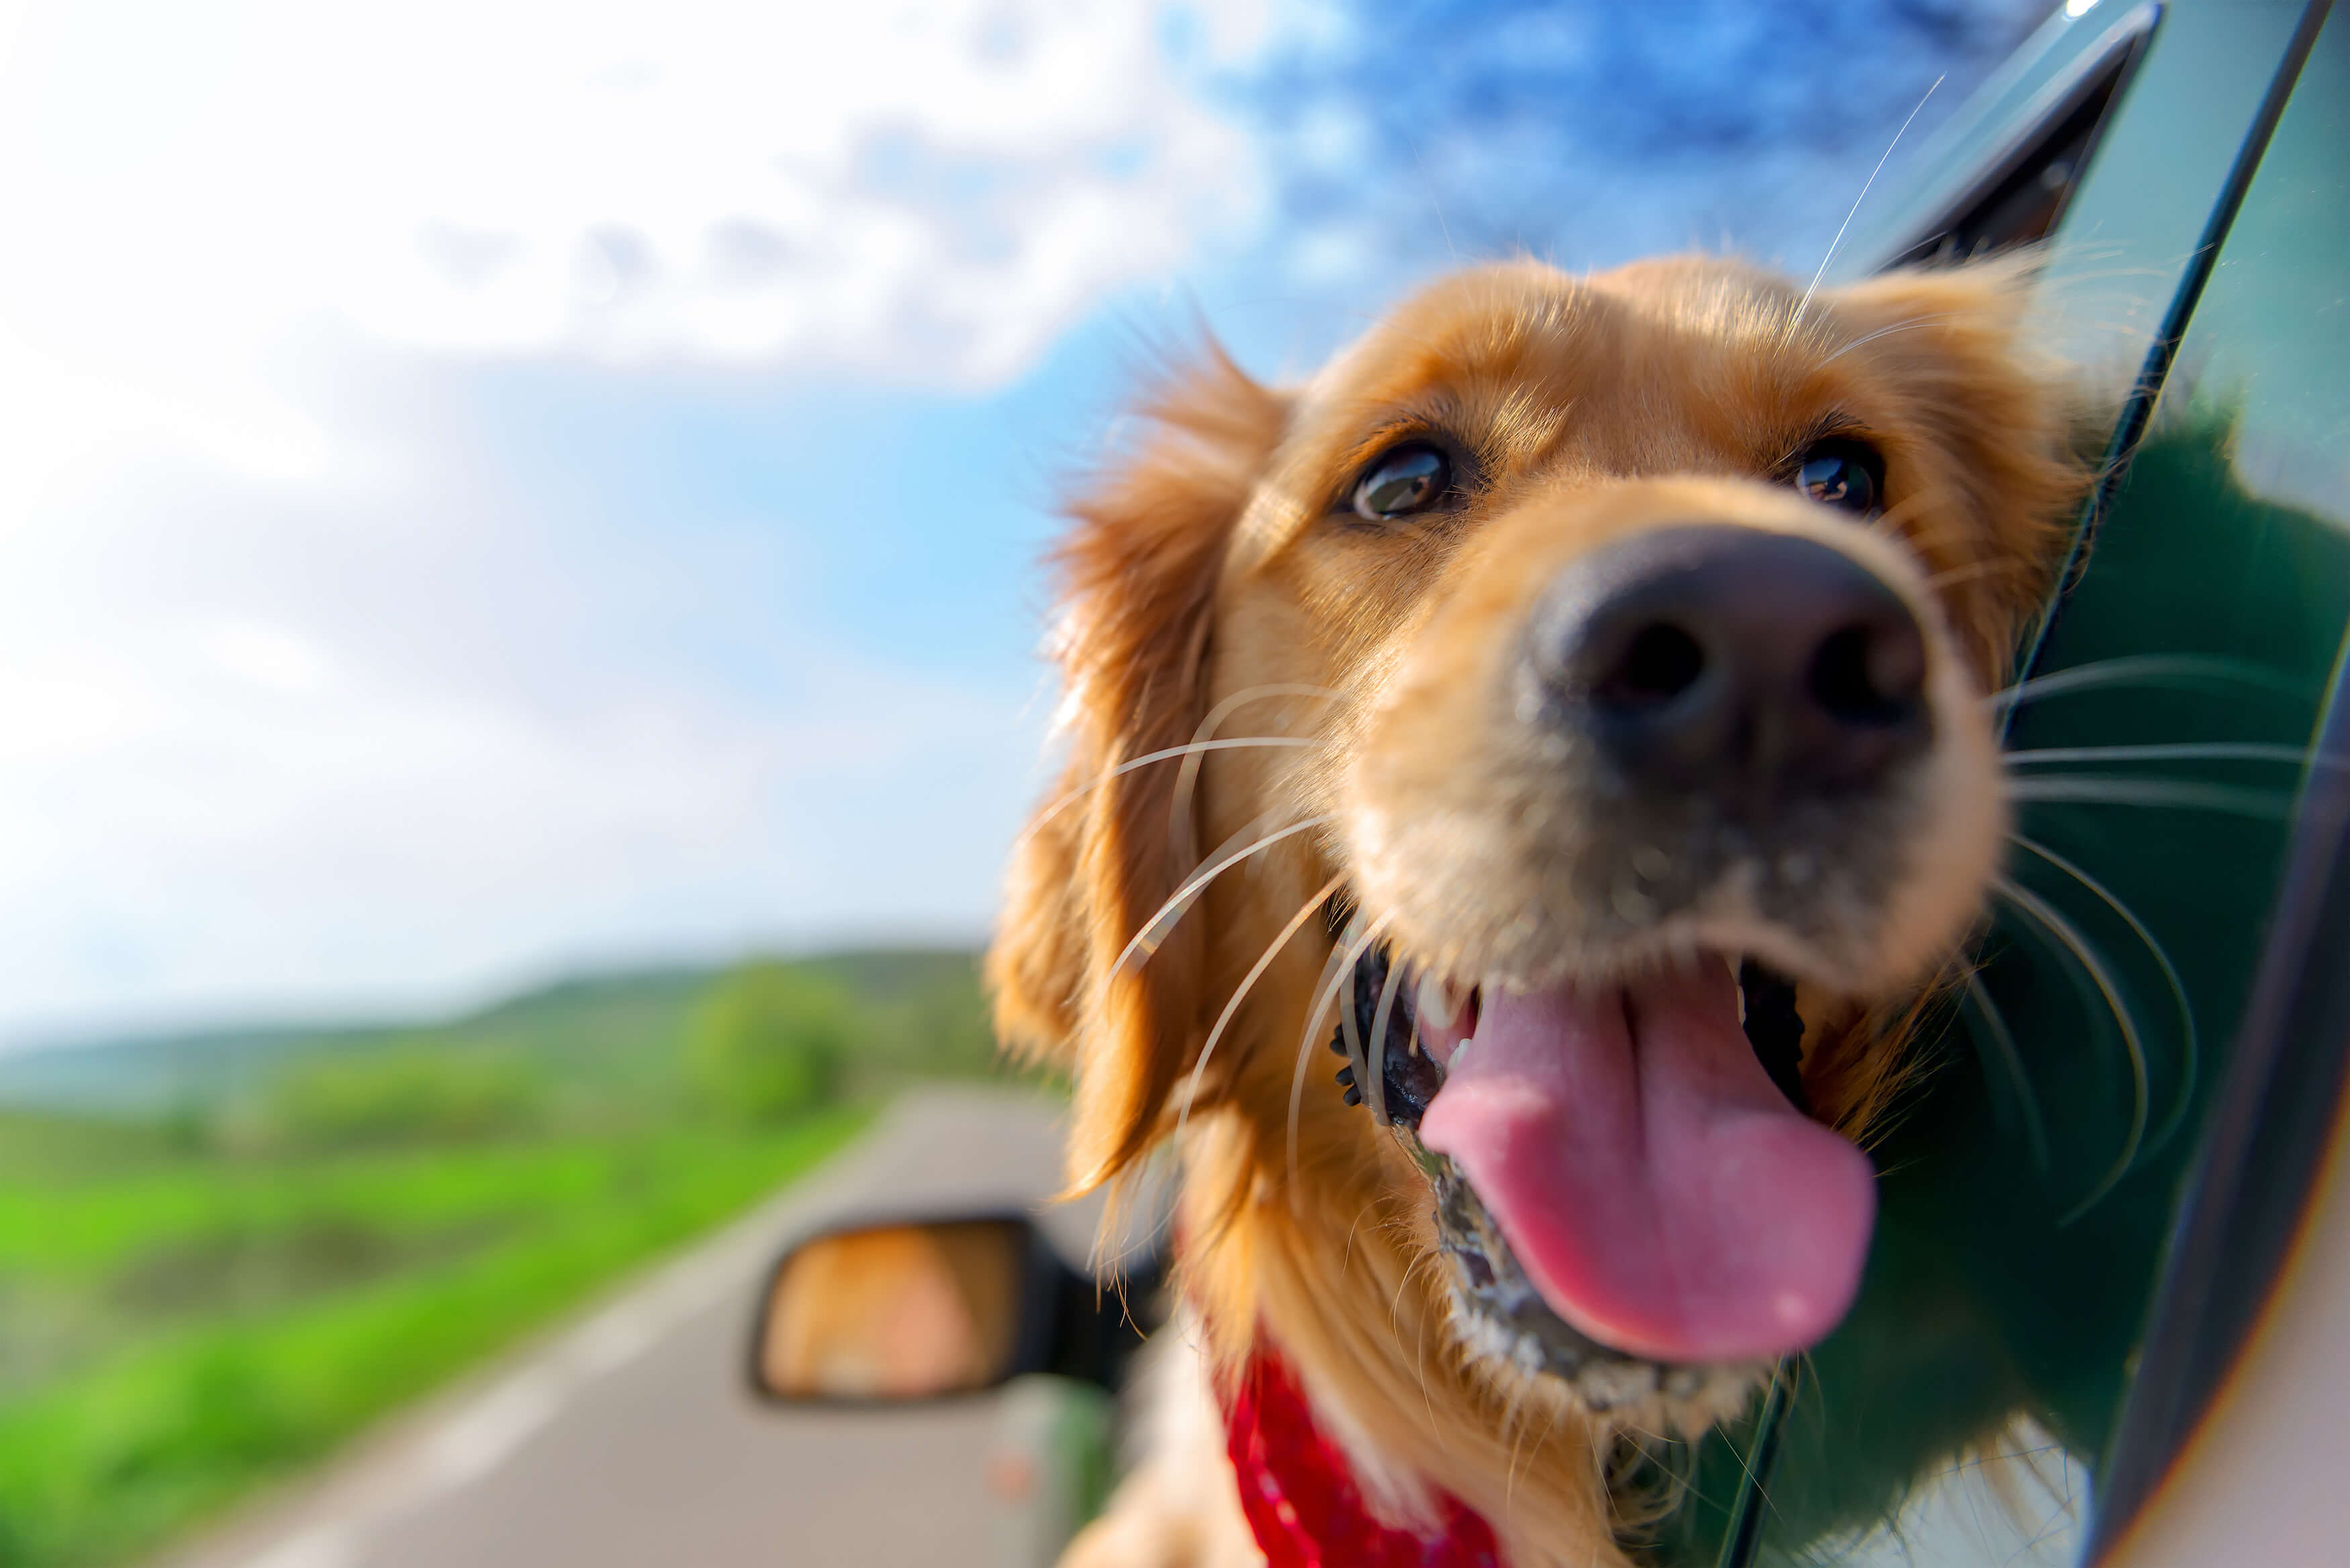 Should You Let Your Dogs Stick Their Heads Outside the Car Window